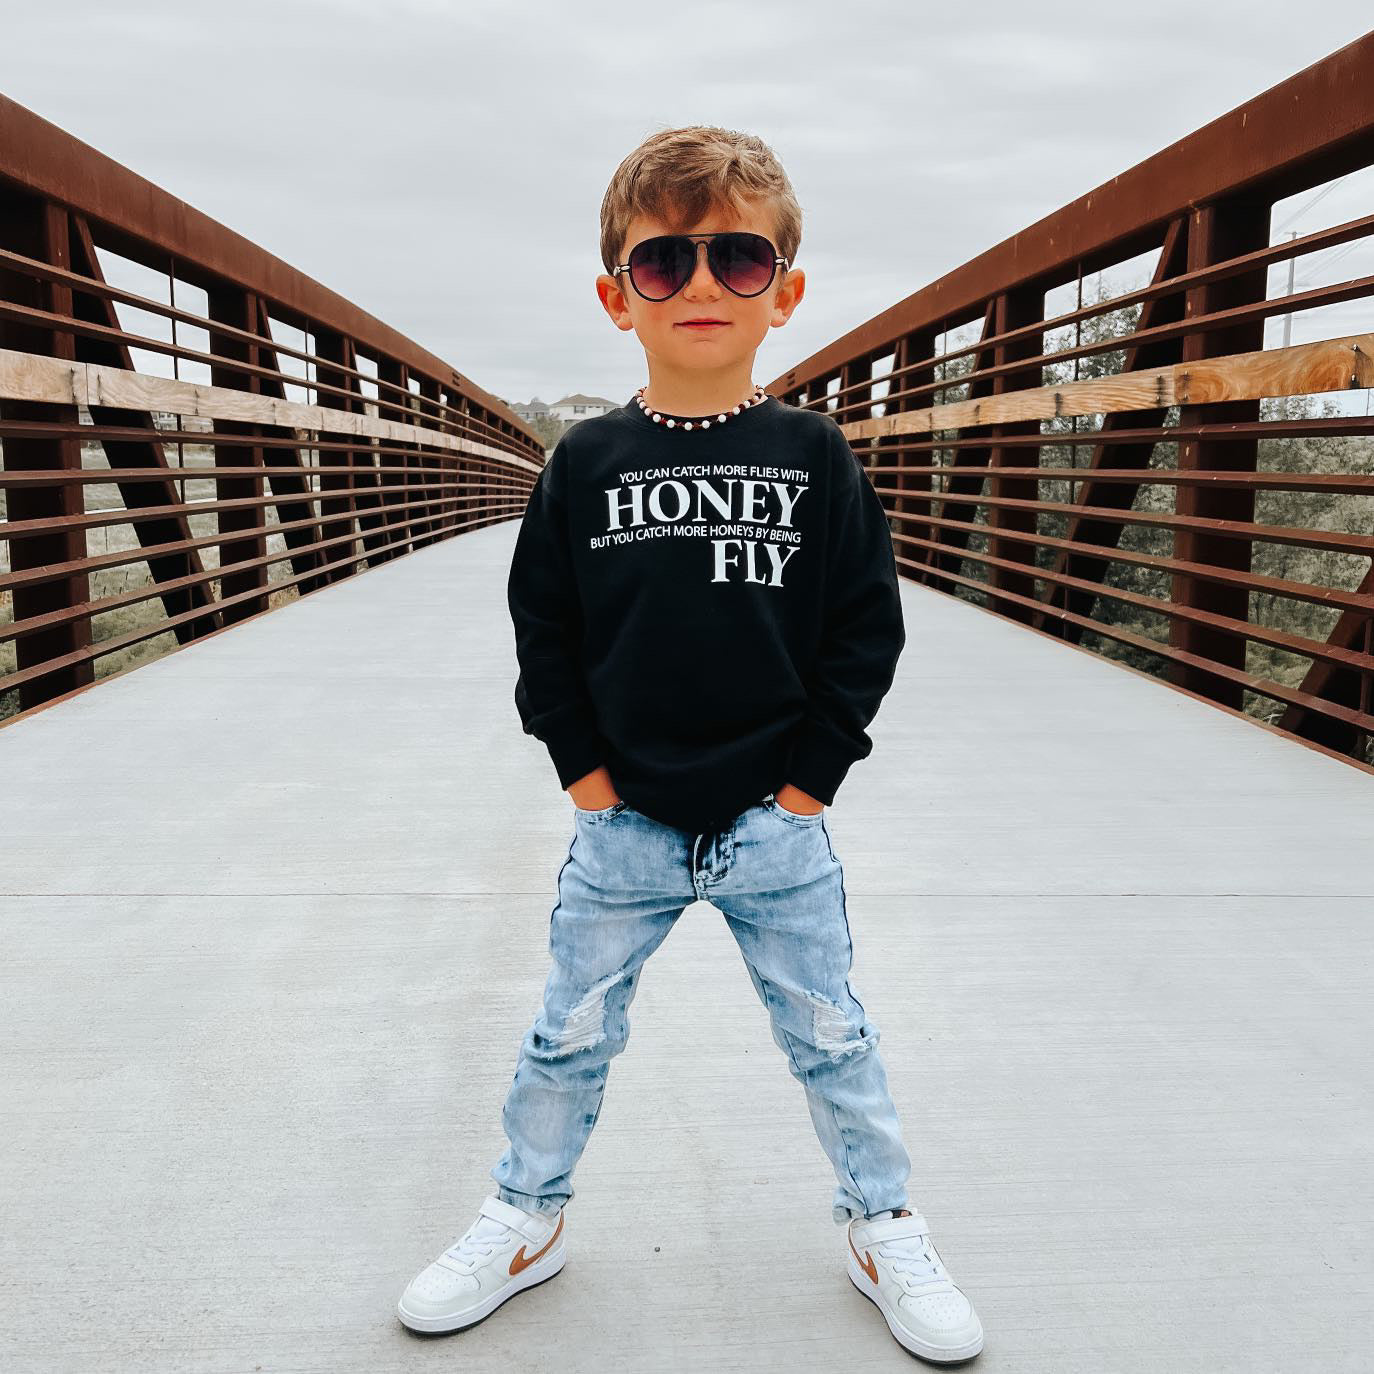 You catch more honeys being fly! – East Coast Clothing